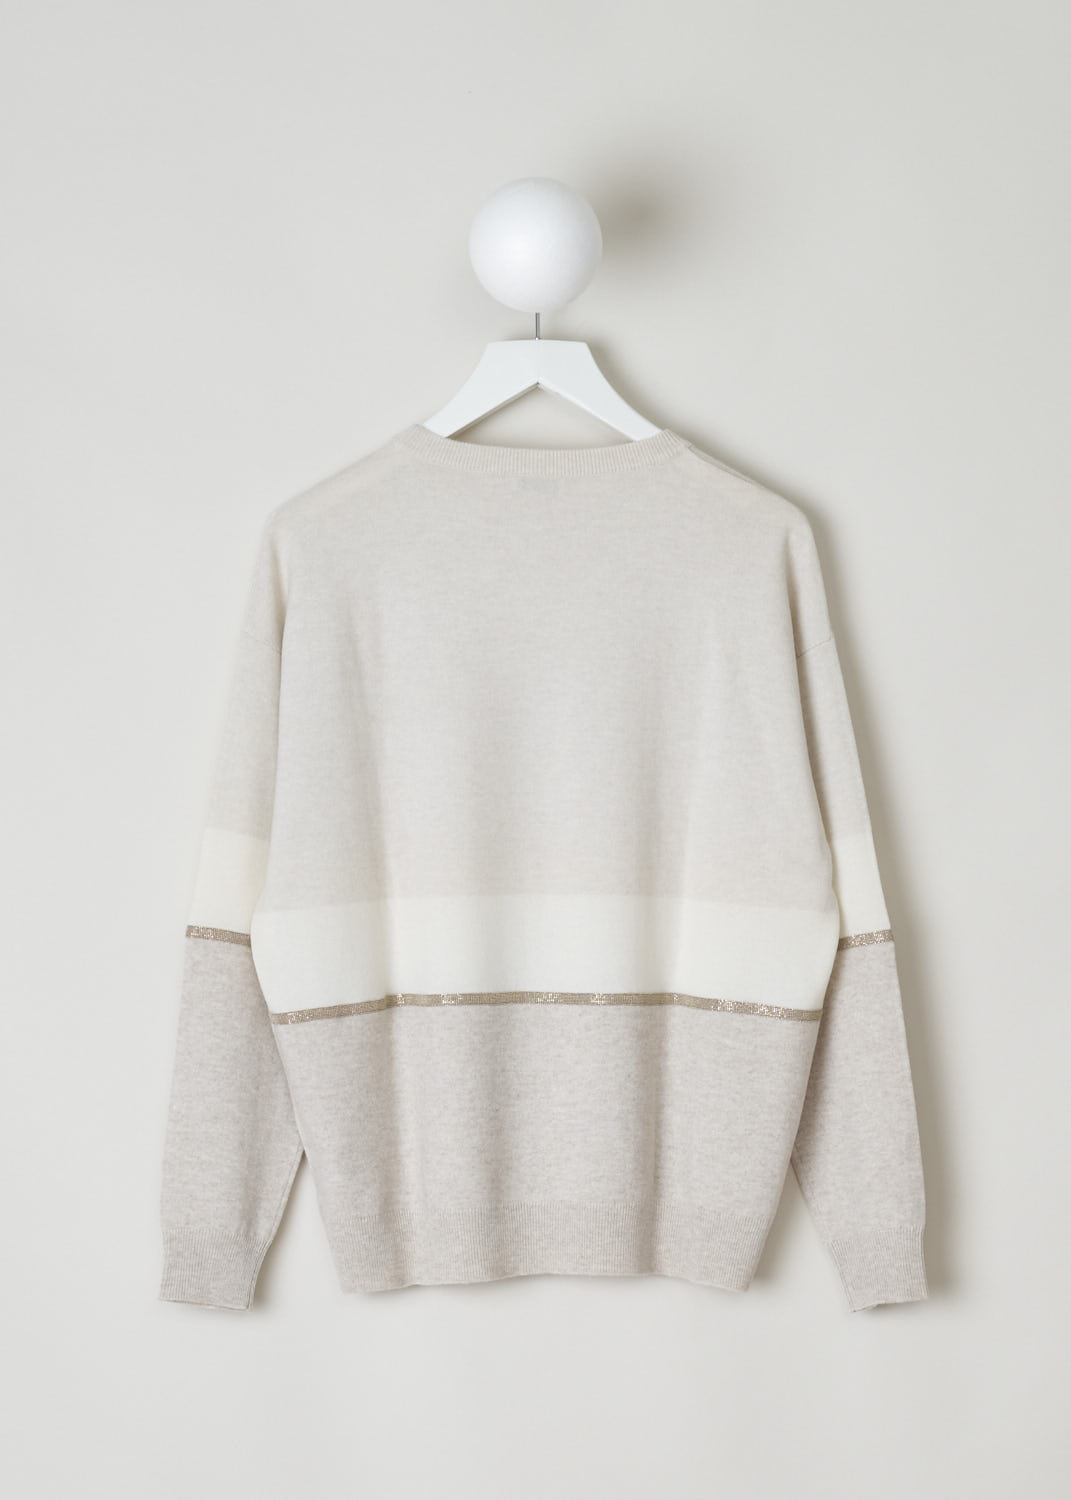 BRUNELLO CUCINELLI, THREE-TONE SWEATER WITH BEADED DETAILING, Beige, Back, Three-tone sweater in white and pale grey tones with bead-embellished trims. The sweater features long sleeves and has a ribbed hem. 
